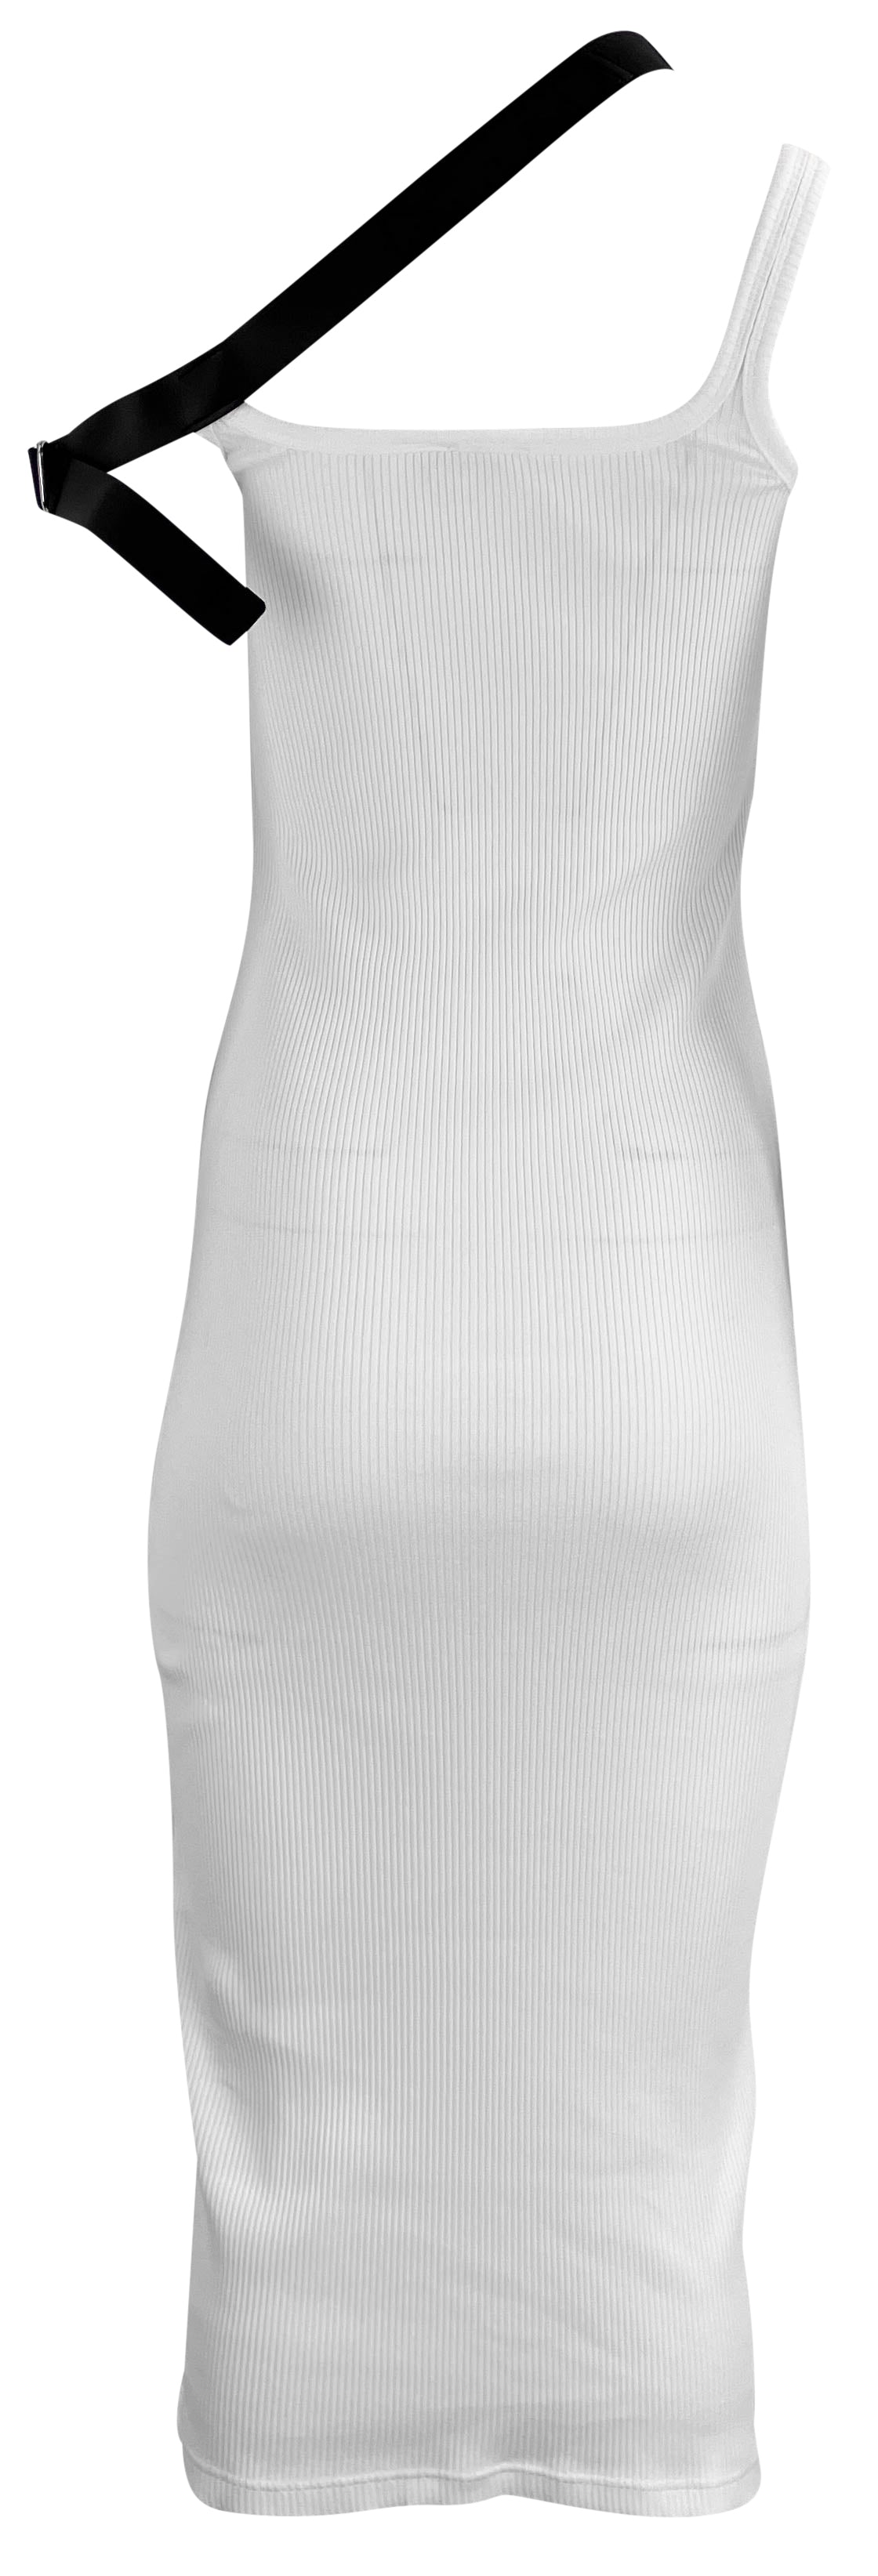 Courrēges Bias Strap 90s Rib-Knit Dress in Cream - Discounts on Courrēges at UAL